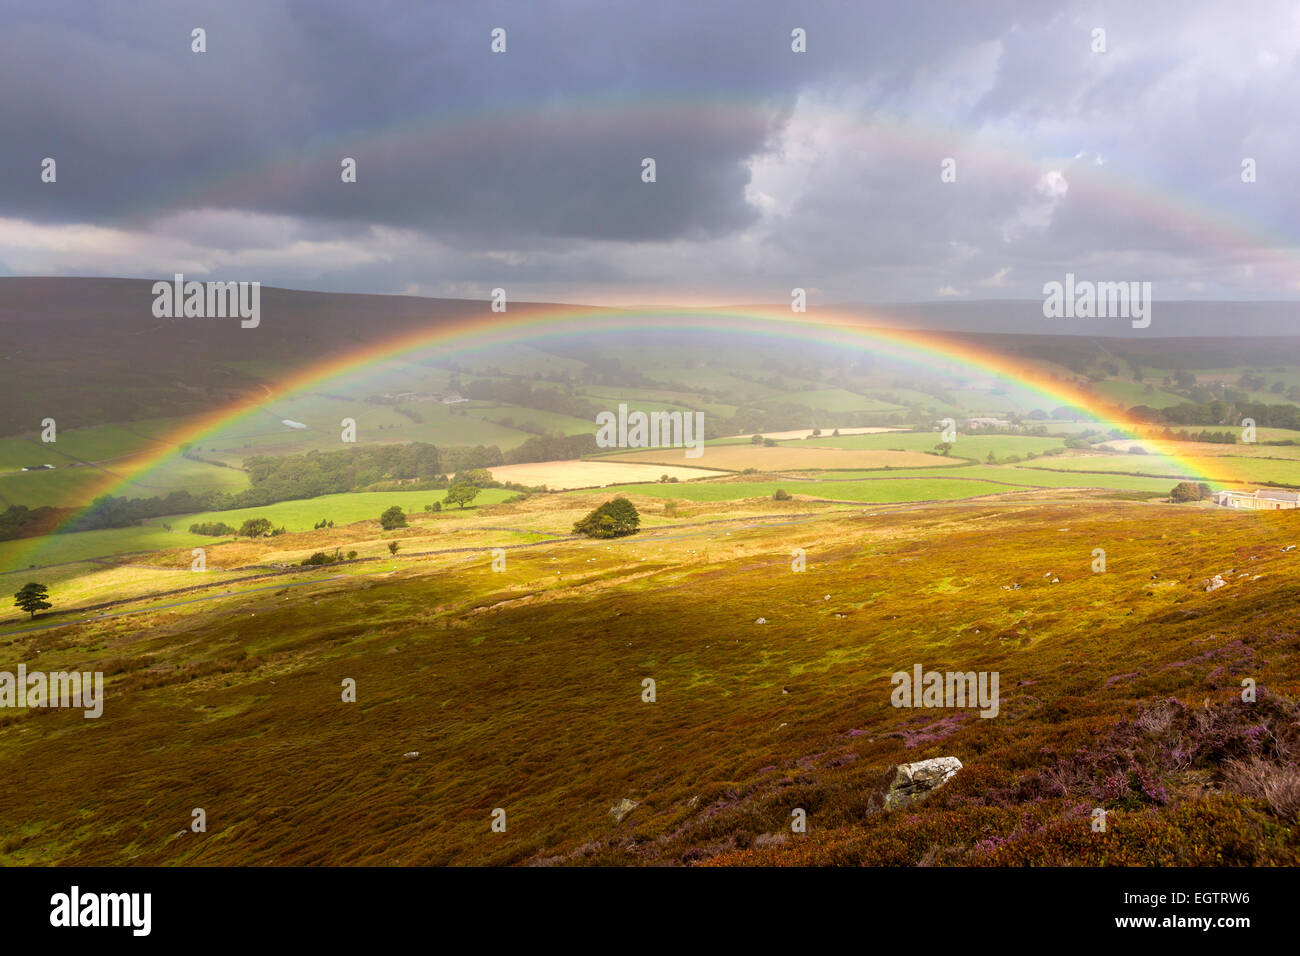 A view over moors near Westerdale, North York Moors National Park, North Yorkshire, England, United Kingdom, Europe. Stock Photo